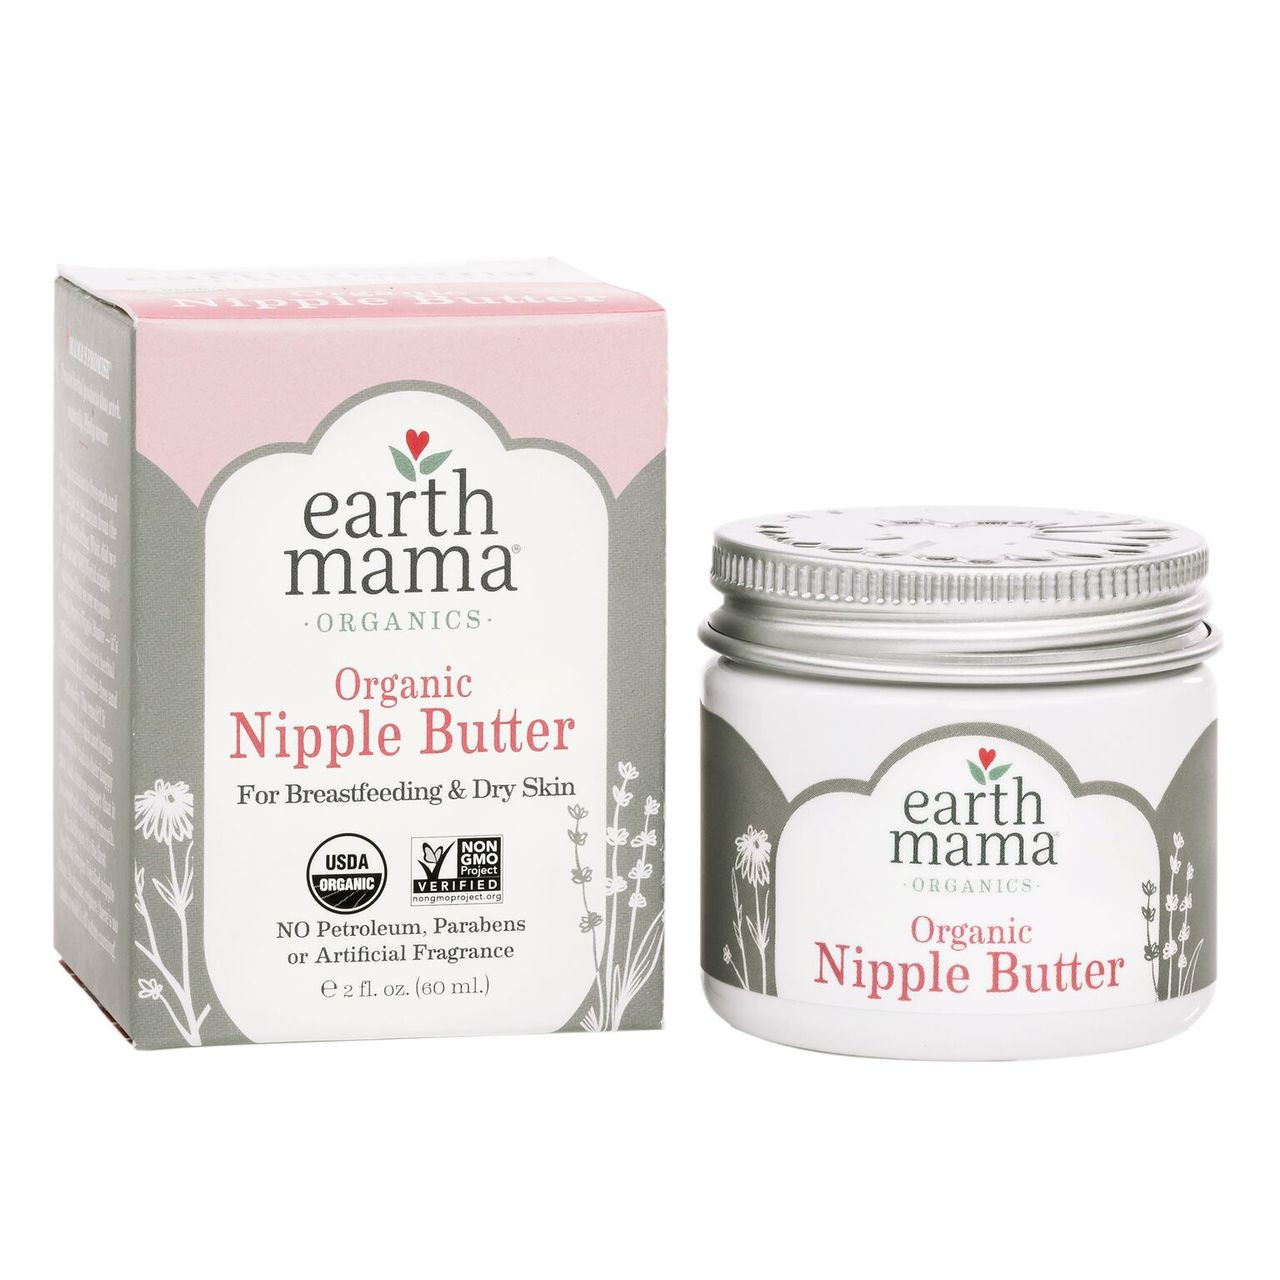 https://cdn2.bigcommerce.com/server2900/c9654/products/3458/images/7809/Earth_mama_nipple_butter__72320.1546635224.1280.1280.jpg?c=2